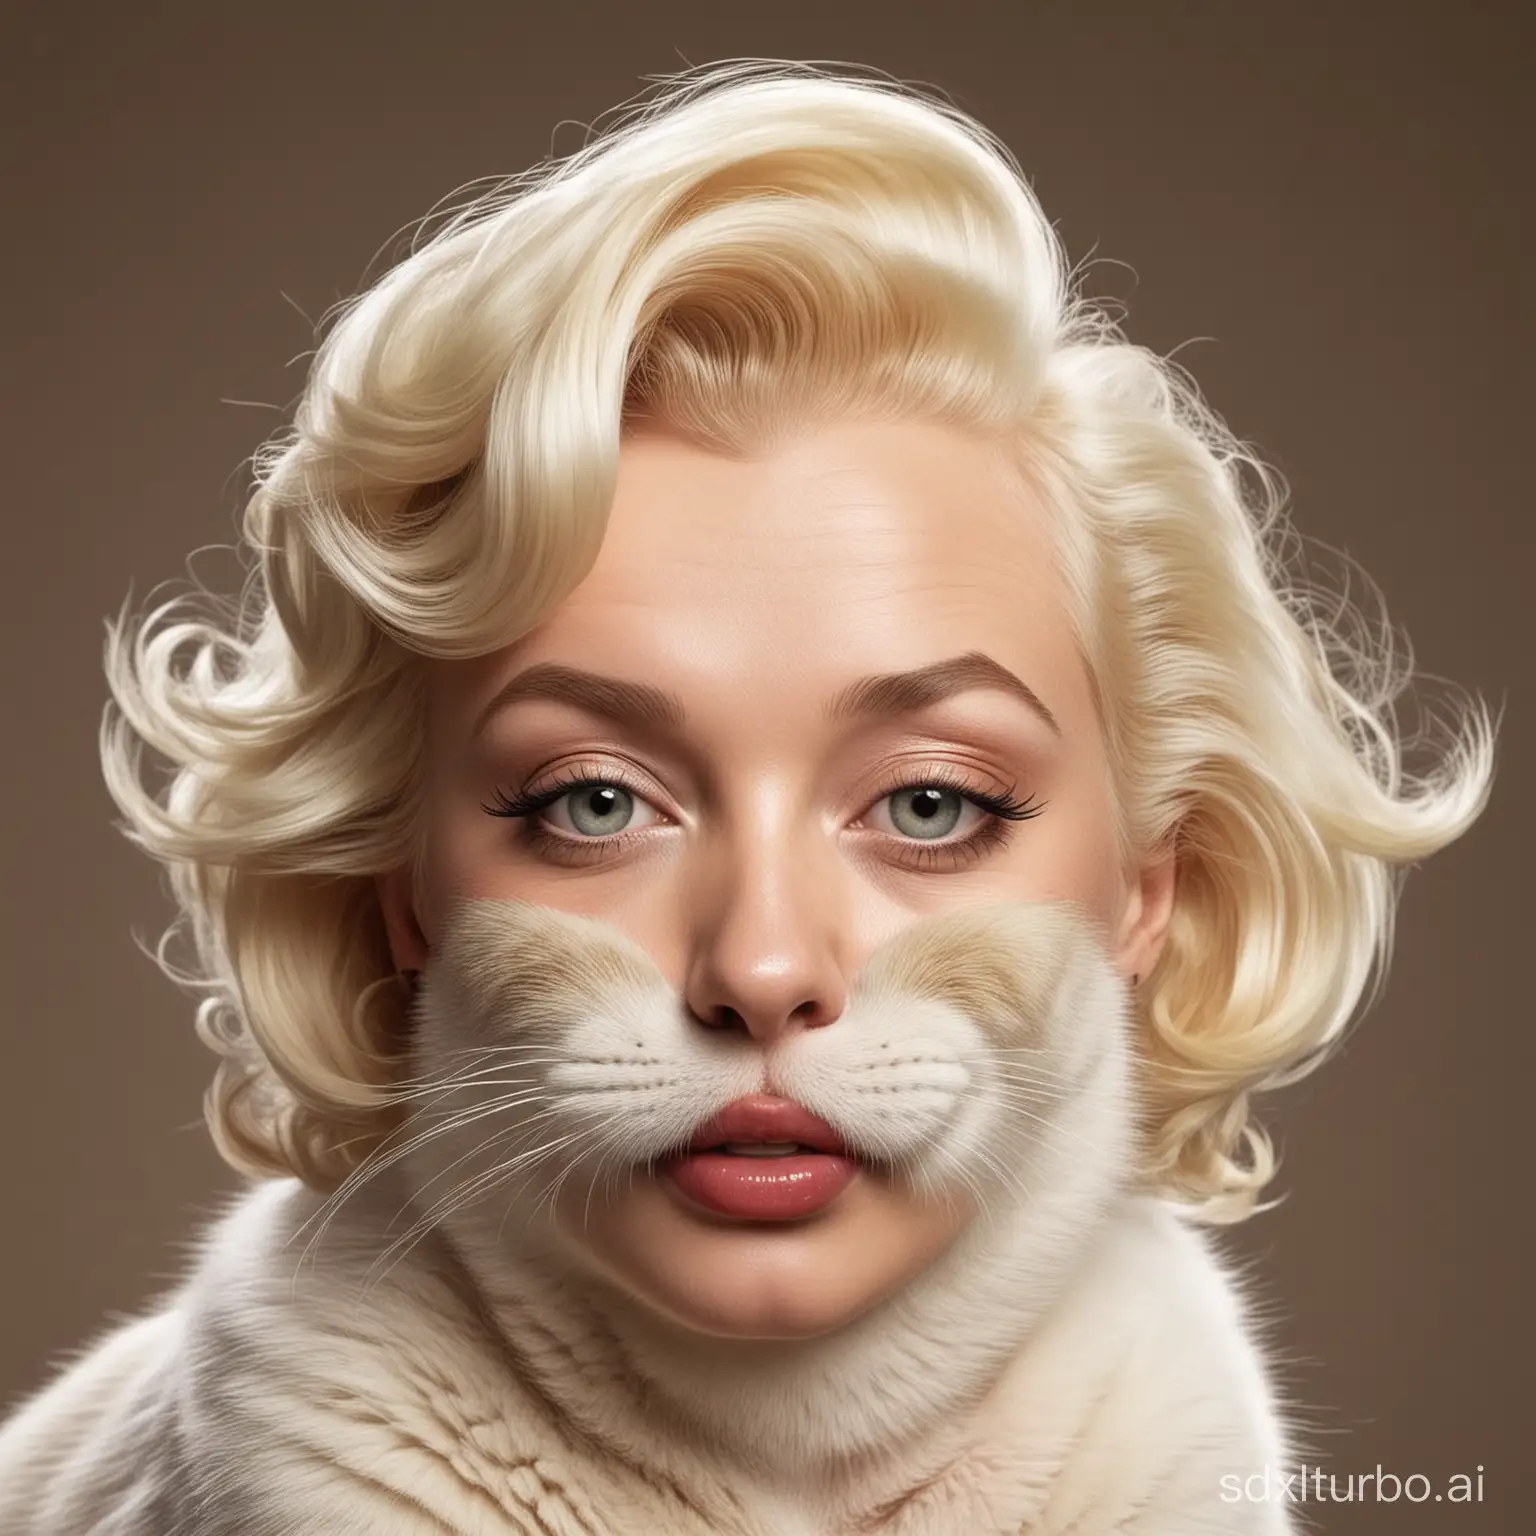 Marilyn Monroe's face turned into a cat